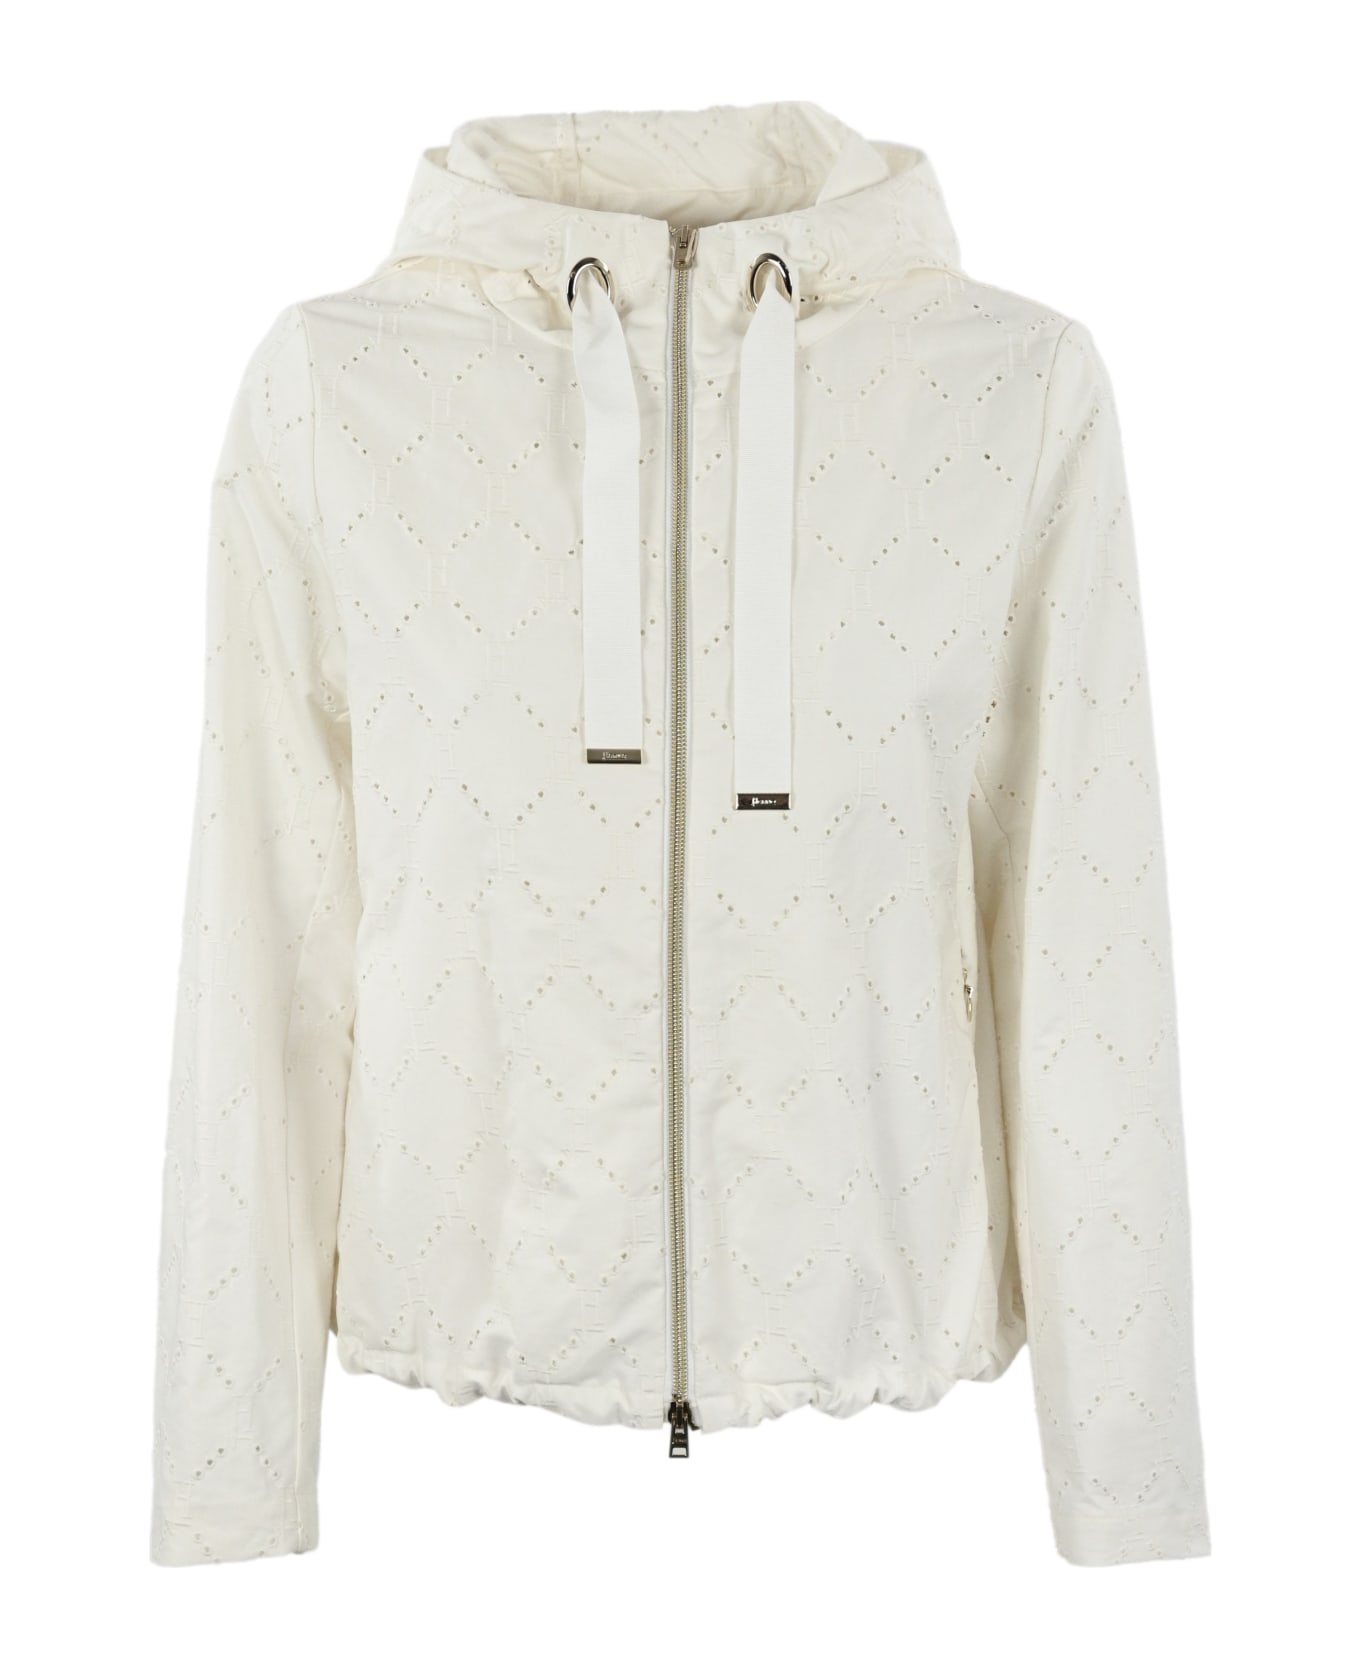 Herno Perforated Jacket With Hood - White ジャケット